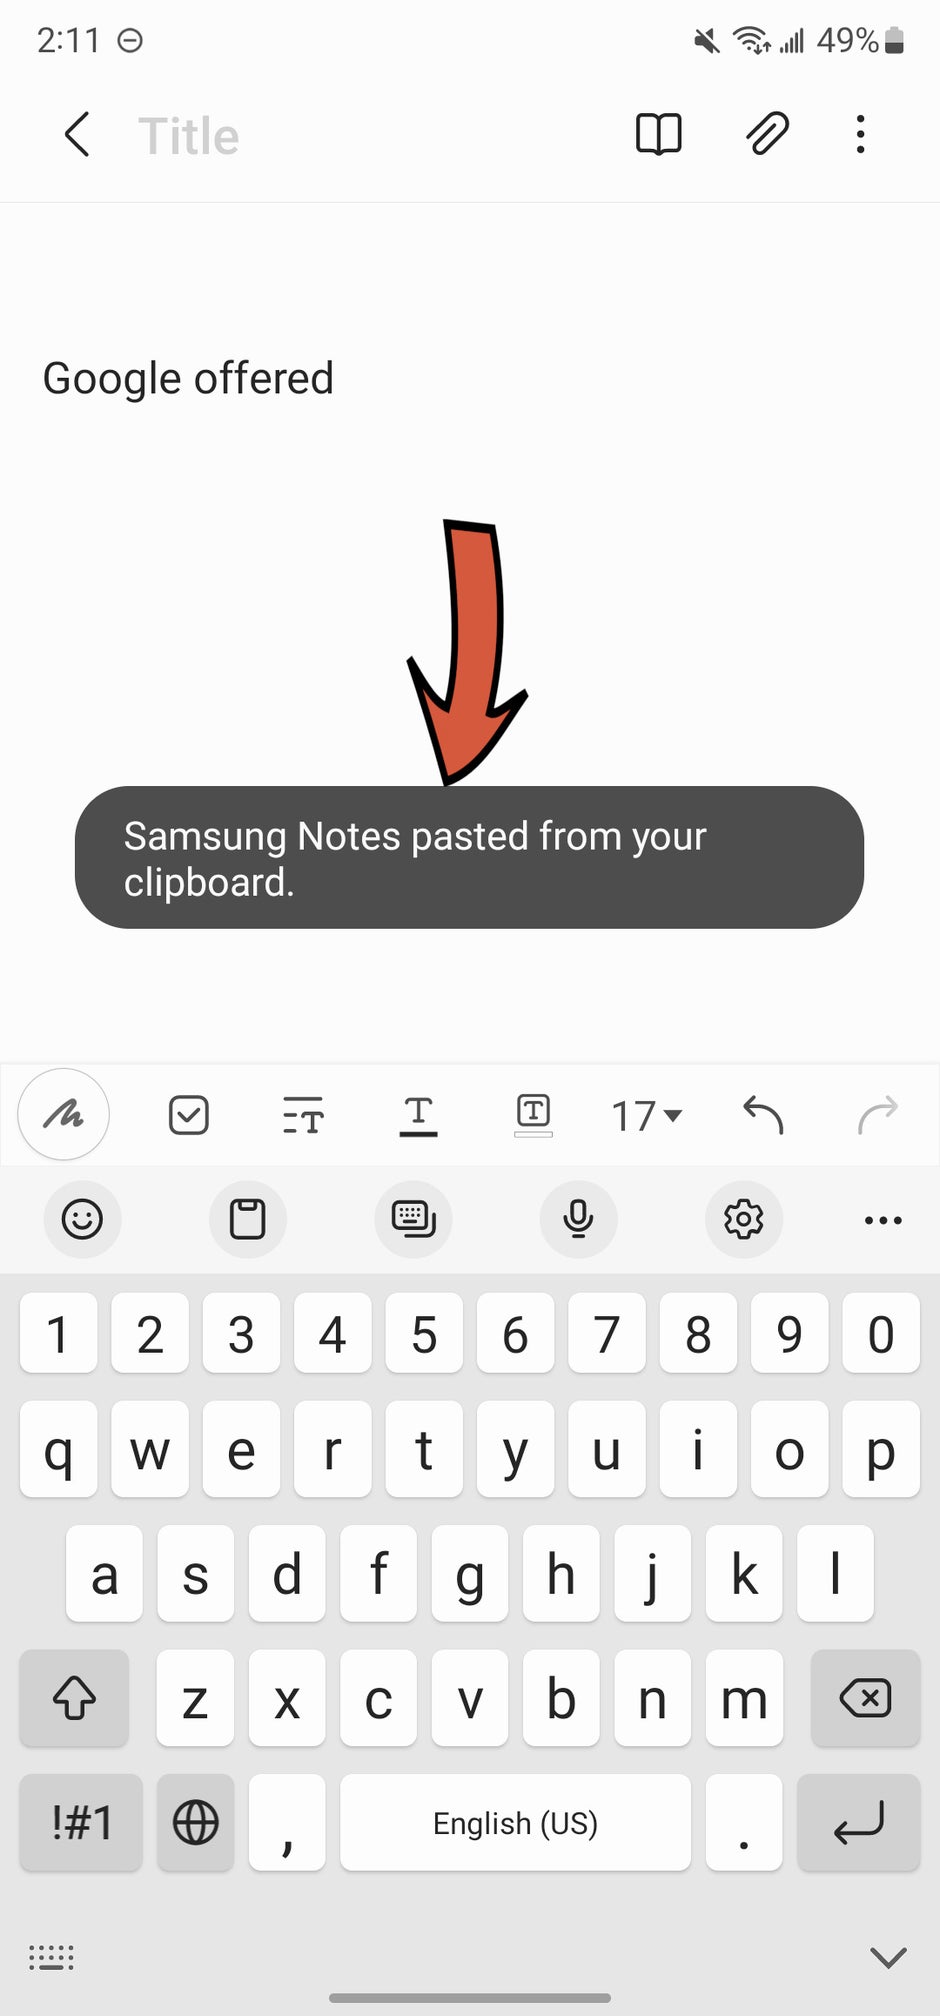 New Samsung owners should activate this feature (clipboard access alert)